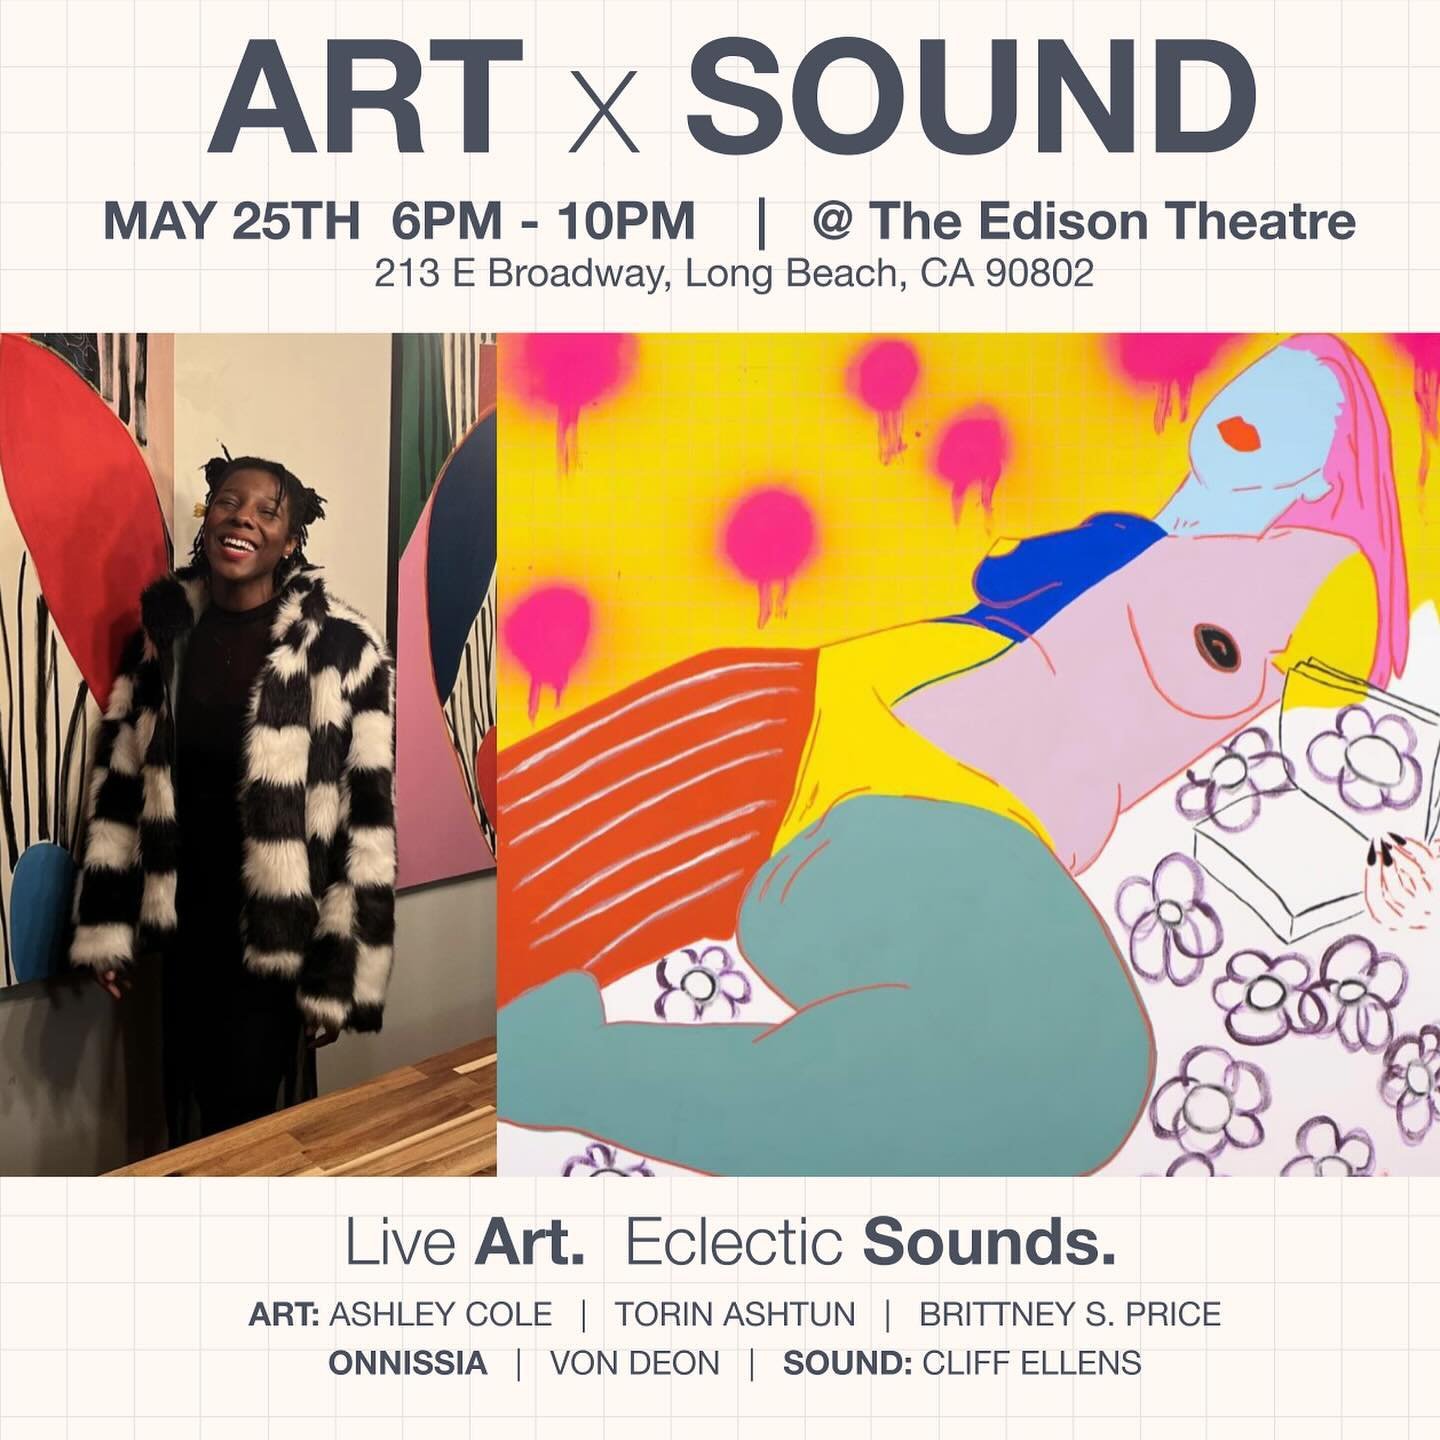 &ldquo;ART x SOUND&rdquo;, a Pop-Up Exhibition at The Edison Theater in Long Beach.

Mark your calendars for May 25th at 6 PM!

Meet an Art x Sound event artist:

&ldquo;Onnissia is a self-taught artist whose work explores the intersection of Black f